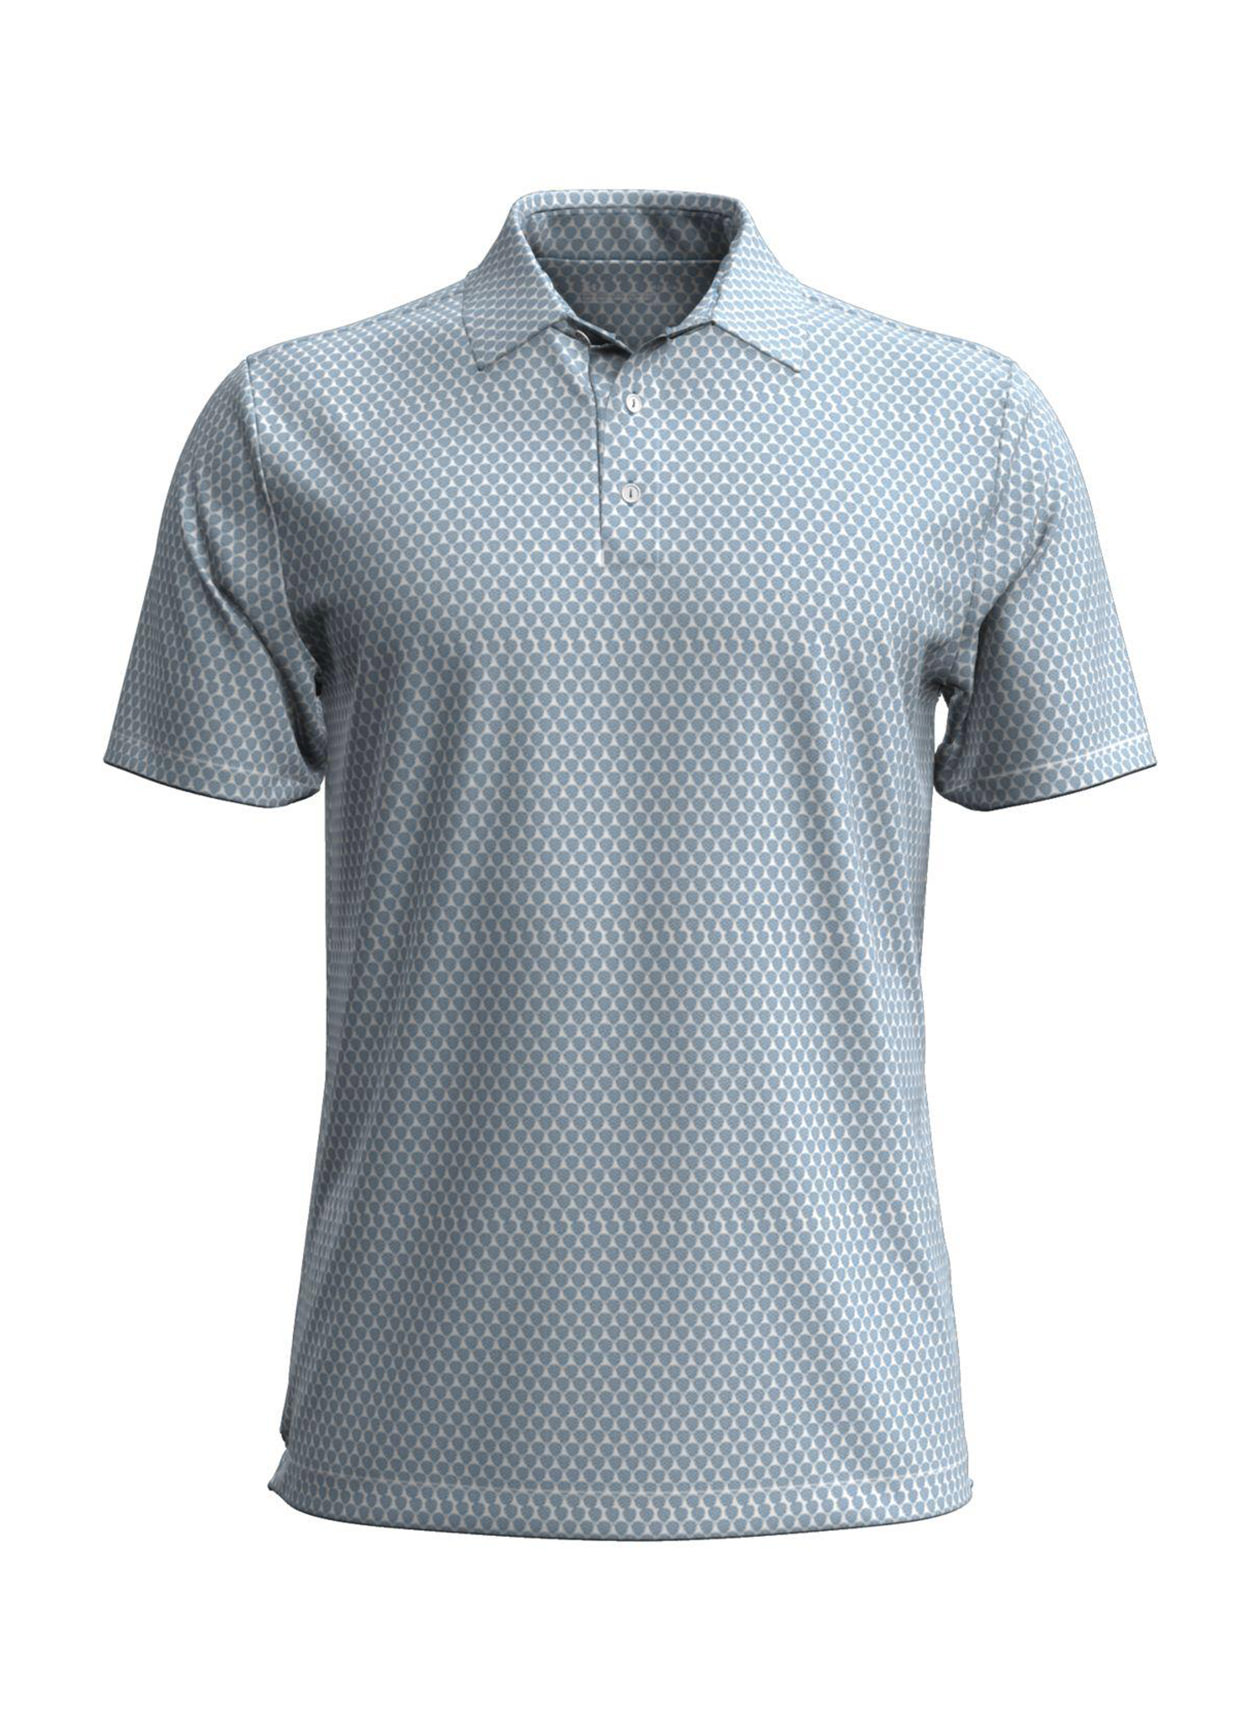 12ct. Custom Under Armour Men's Cosmic Blue Playoff 3.0 Balloons Micro Polo by Corporate Gear